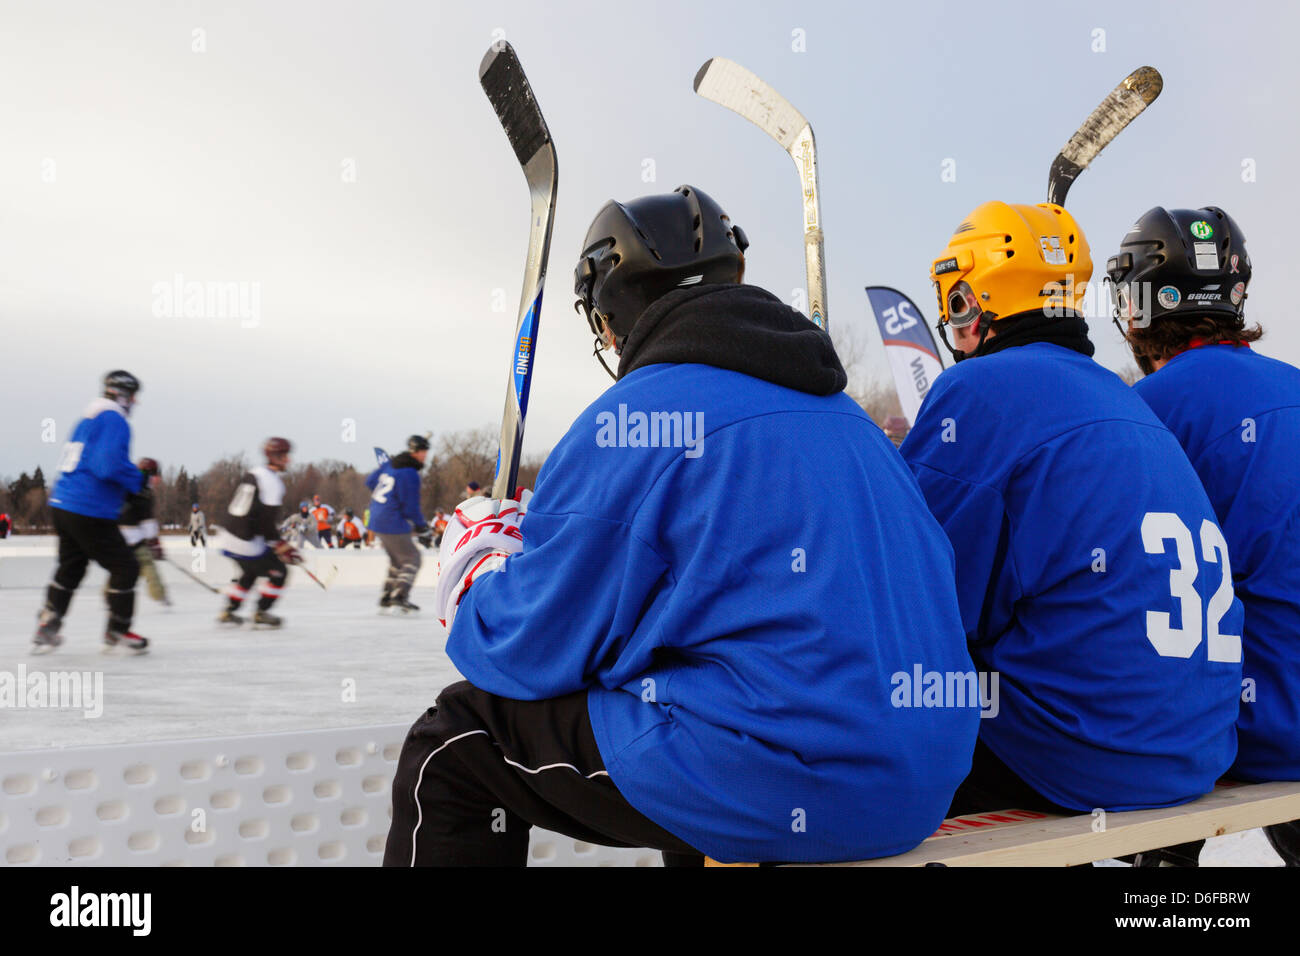 Players watch the action from the team bench during a game at the U.S. Pond Hockey Championships on Lake Nokomis. Stock Photo